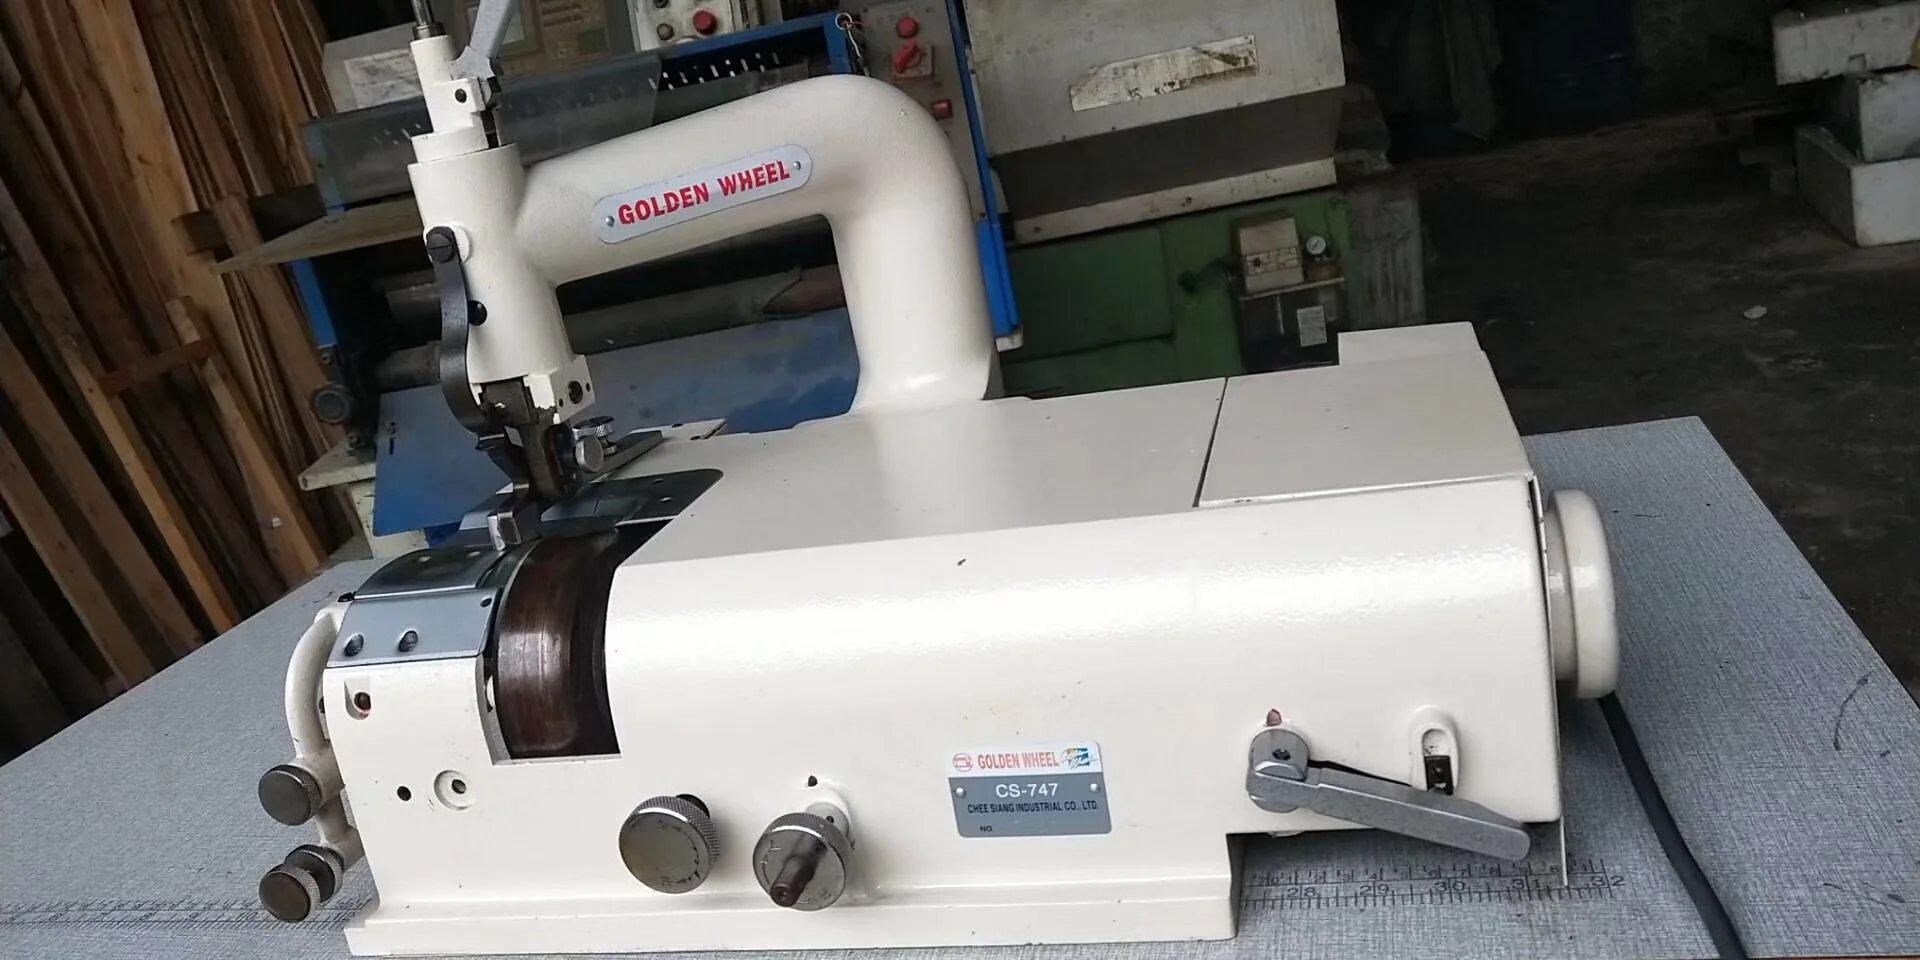 High Quality Golden Wheel Cs-747 Special Models Industry Sewing Machine -  Buy Second Hand Industry Sewing Machine Golden Wheel Cs-747,Taiwan Famous 